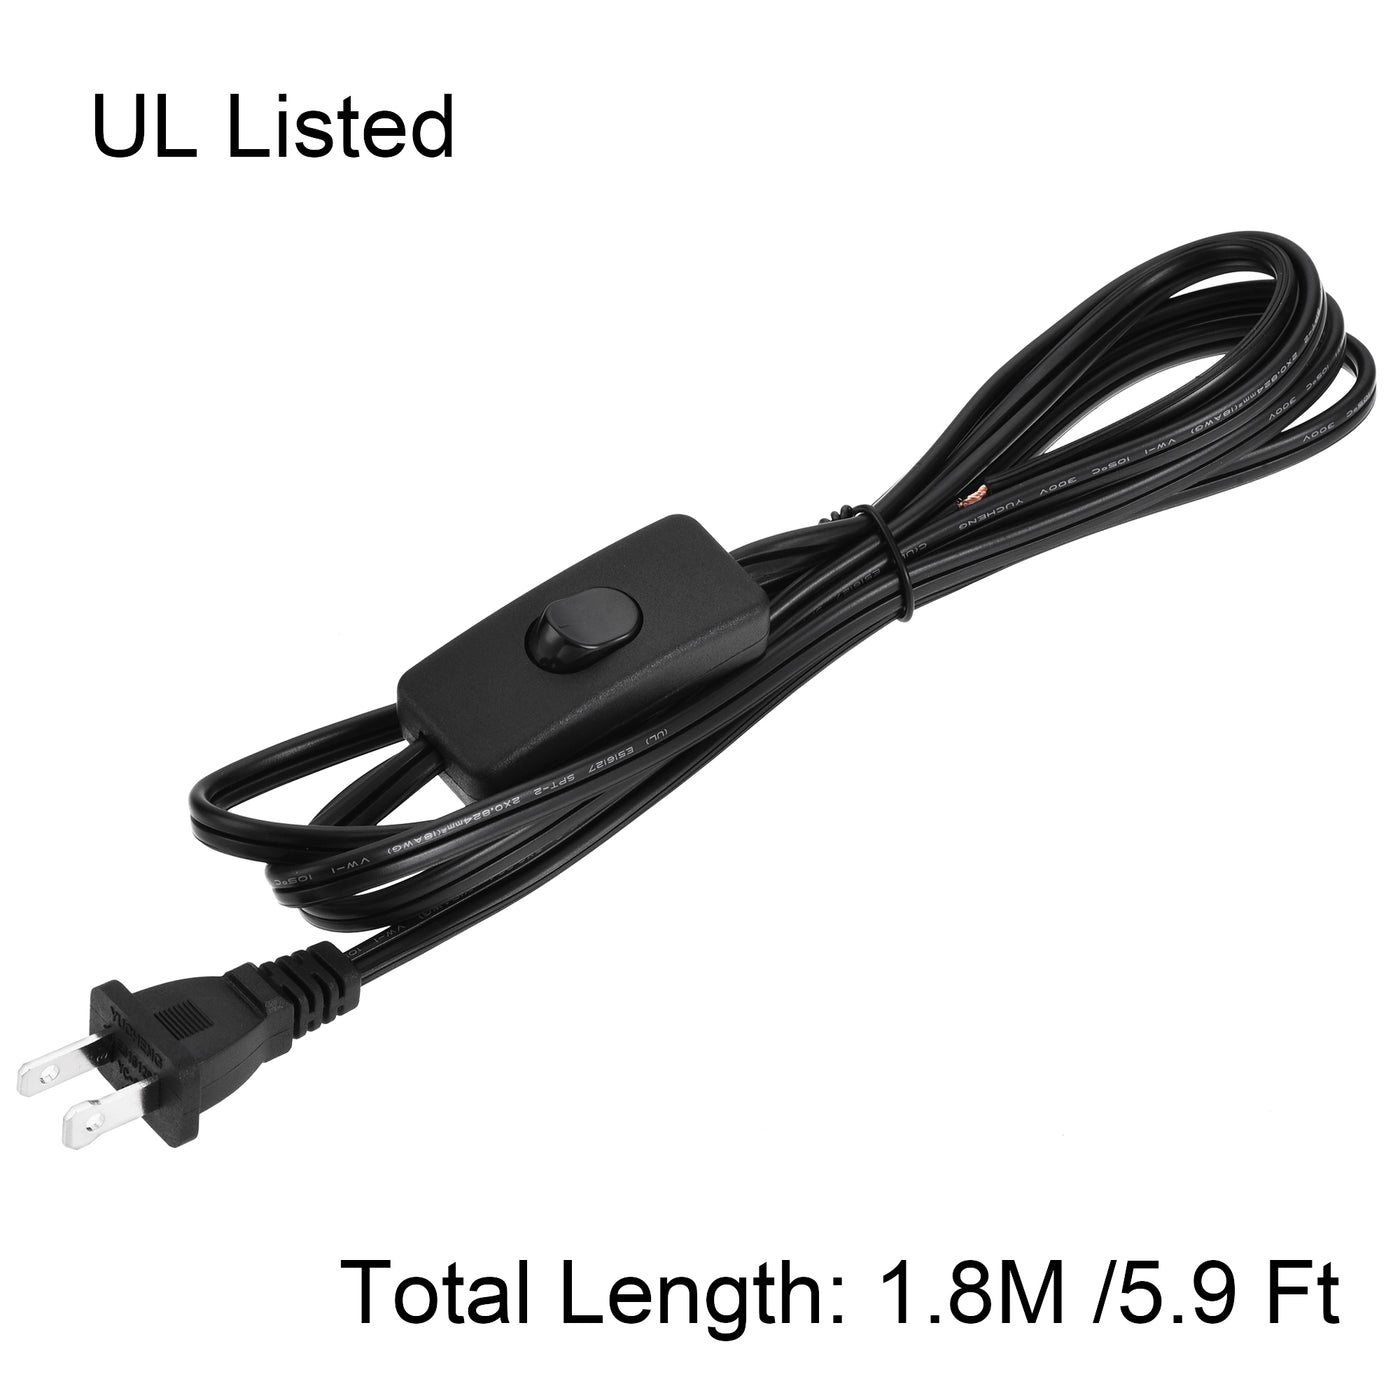 uxcell Uxcell US Plug Lamp Cord with Switch, SPT-2 18AWG Power Wire 1.8M Black, UL Listed 2Pcs